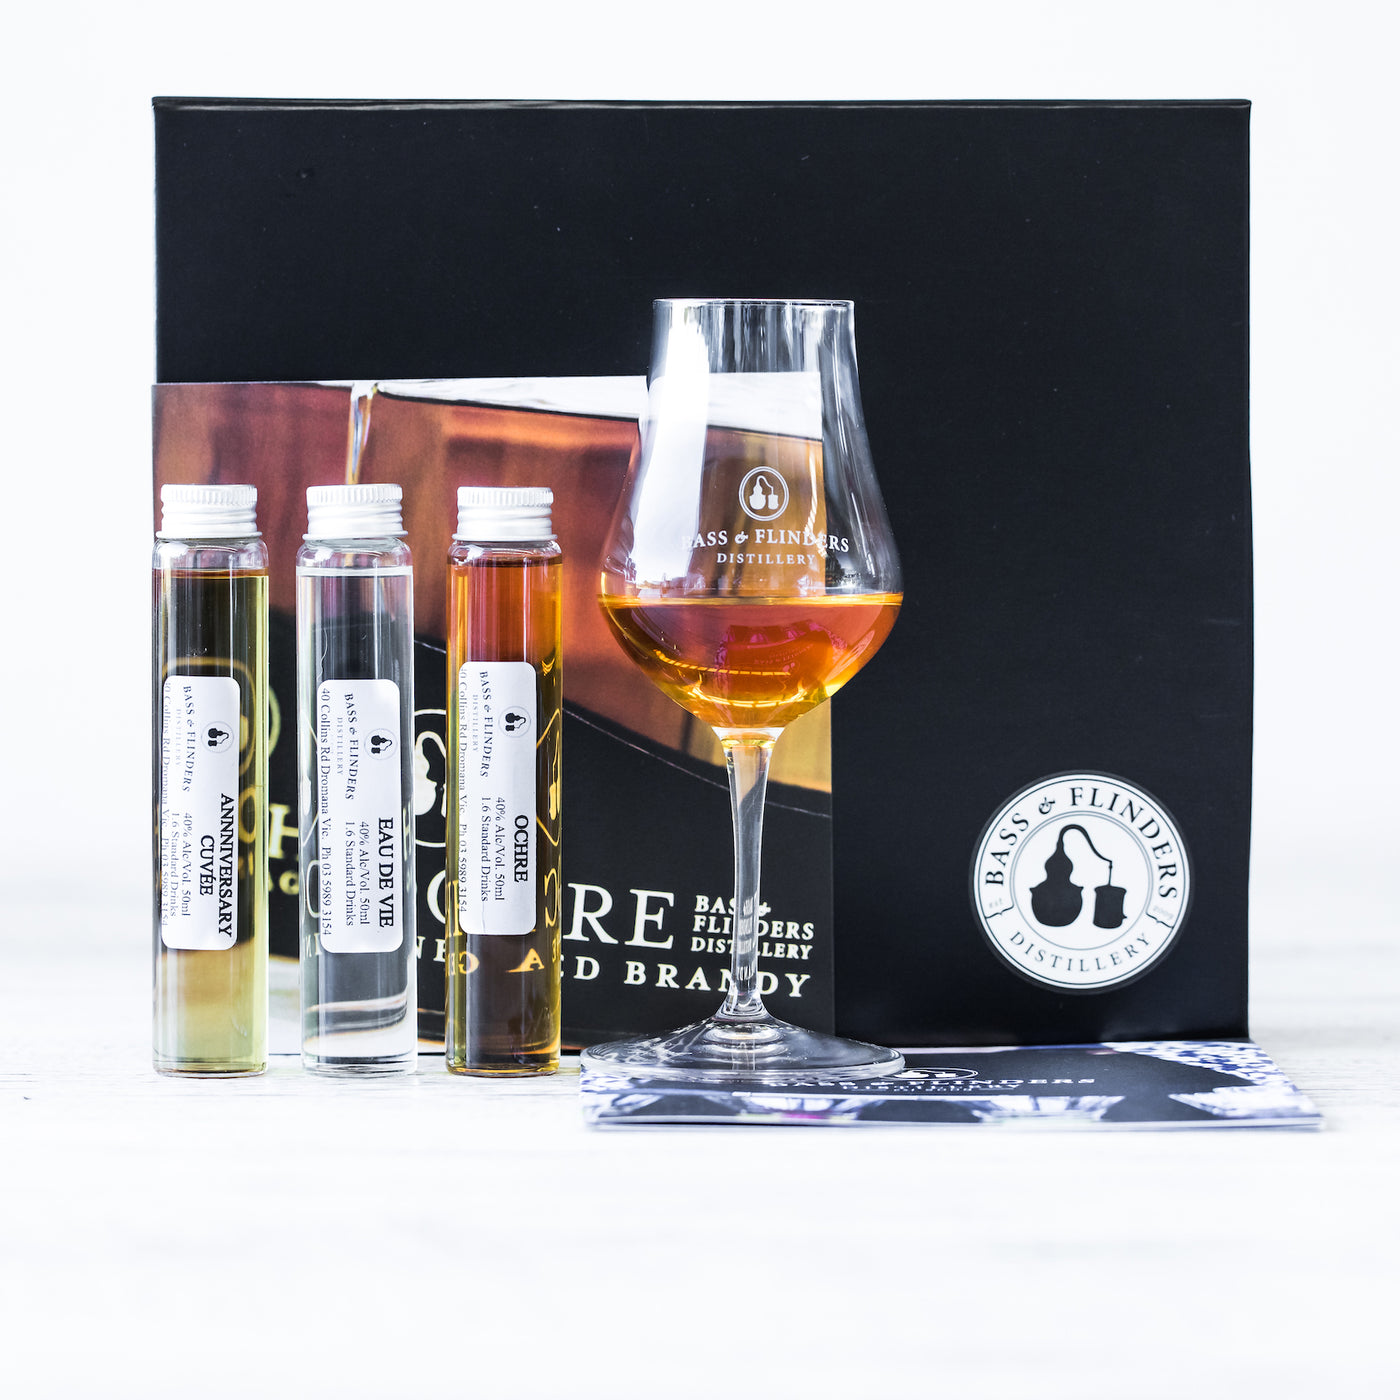 Bass & Flinders Distillery brandy gift pack with glass